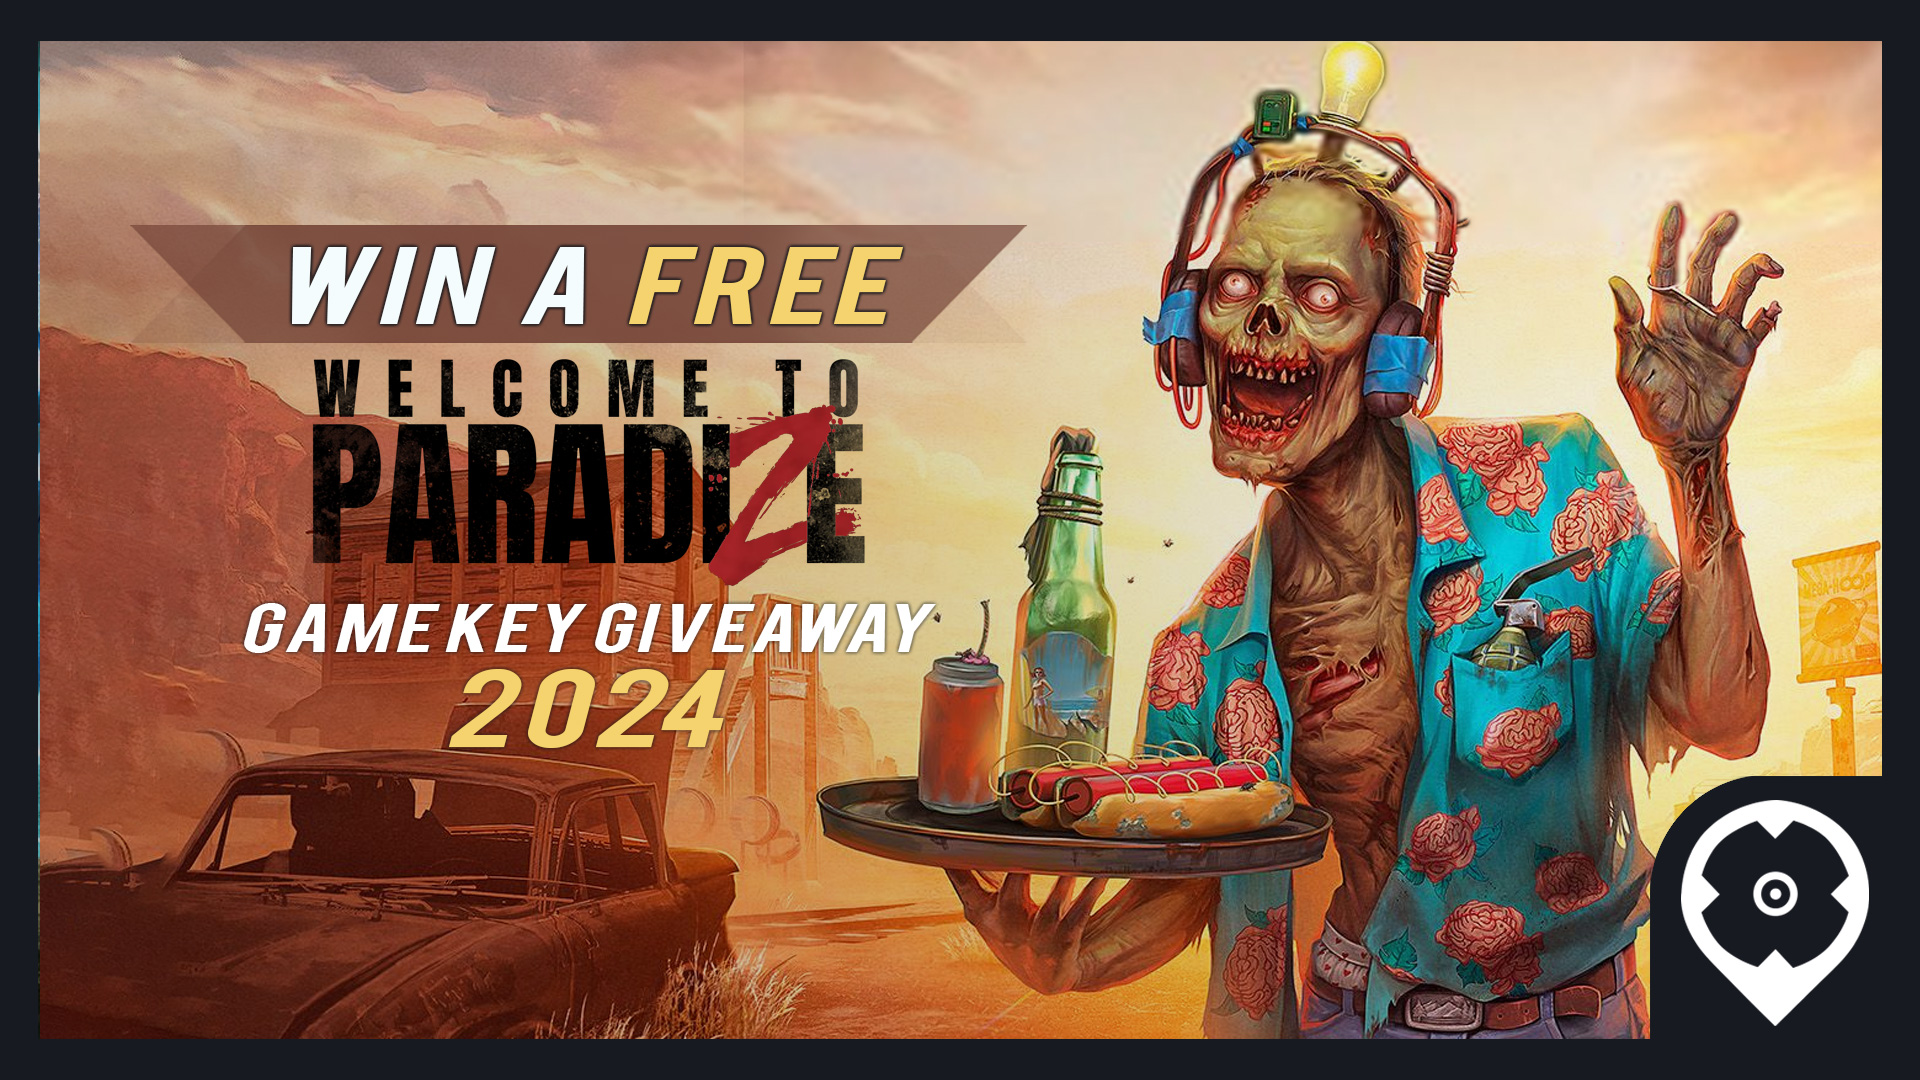 Free Welcome to ParadiZe CD Key